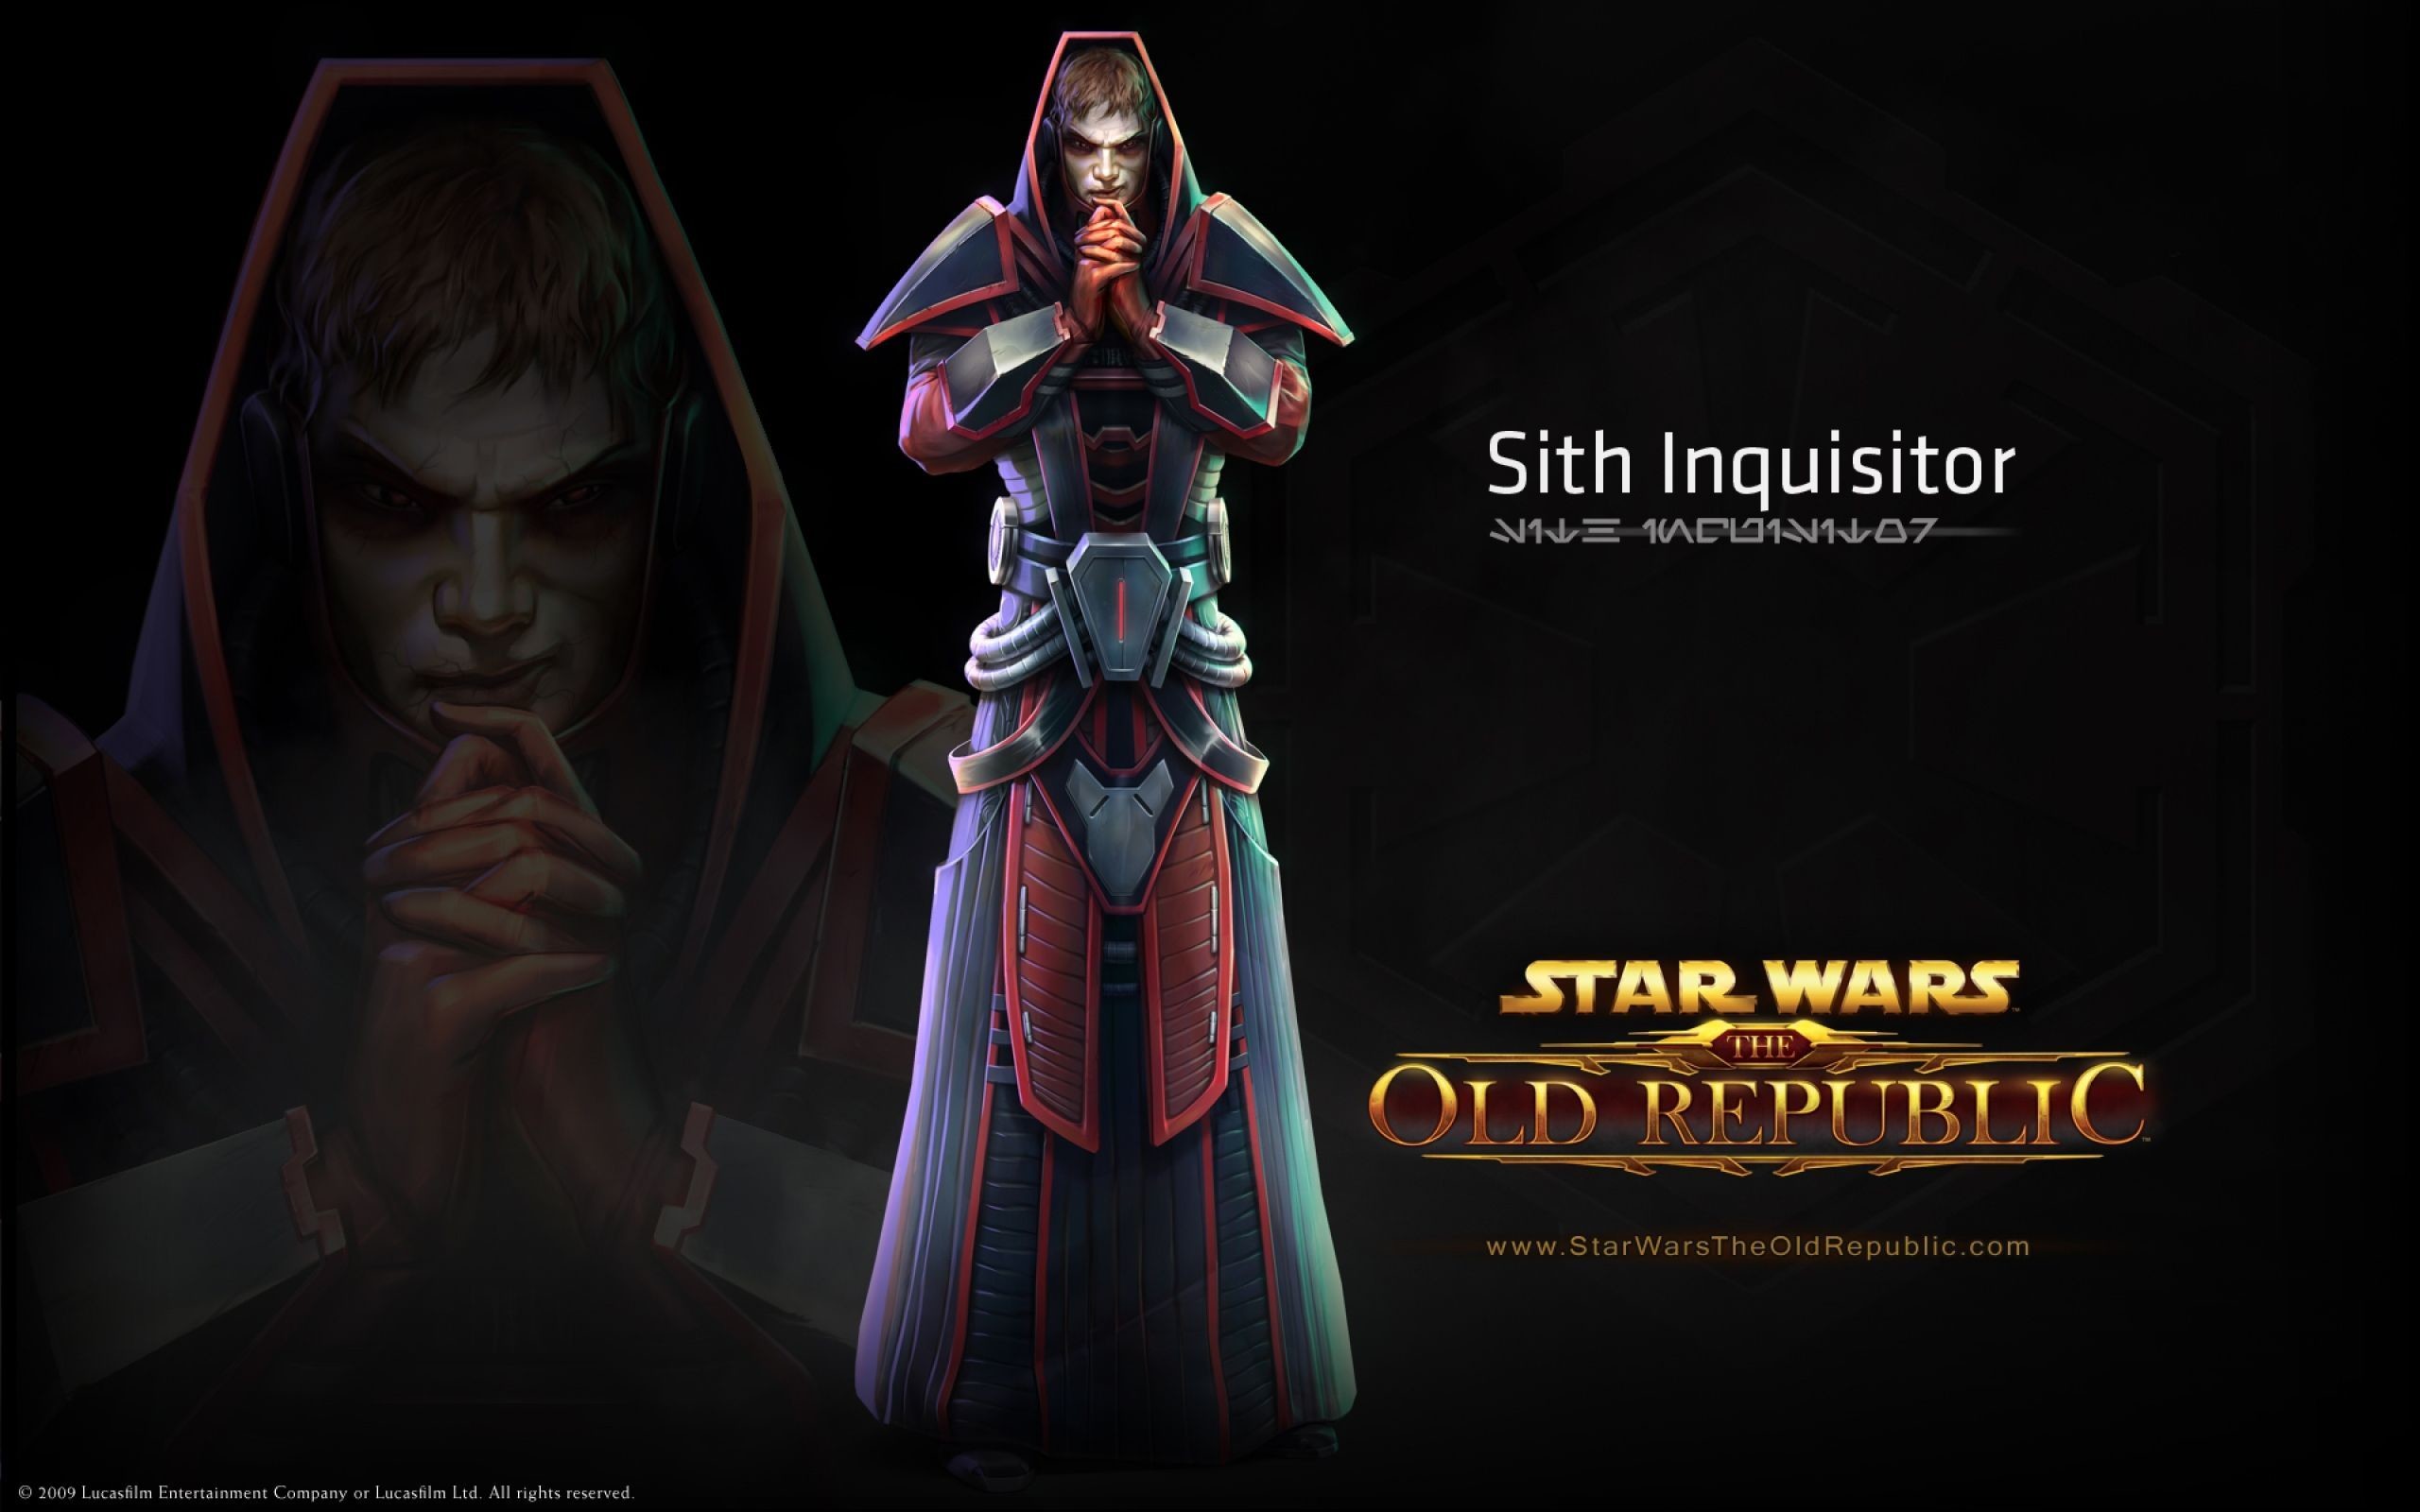 Sith Inquisitor Swtor Computer Wallpapers, Desktop Backgrounds